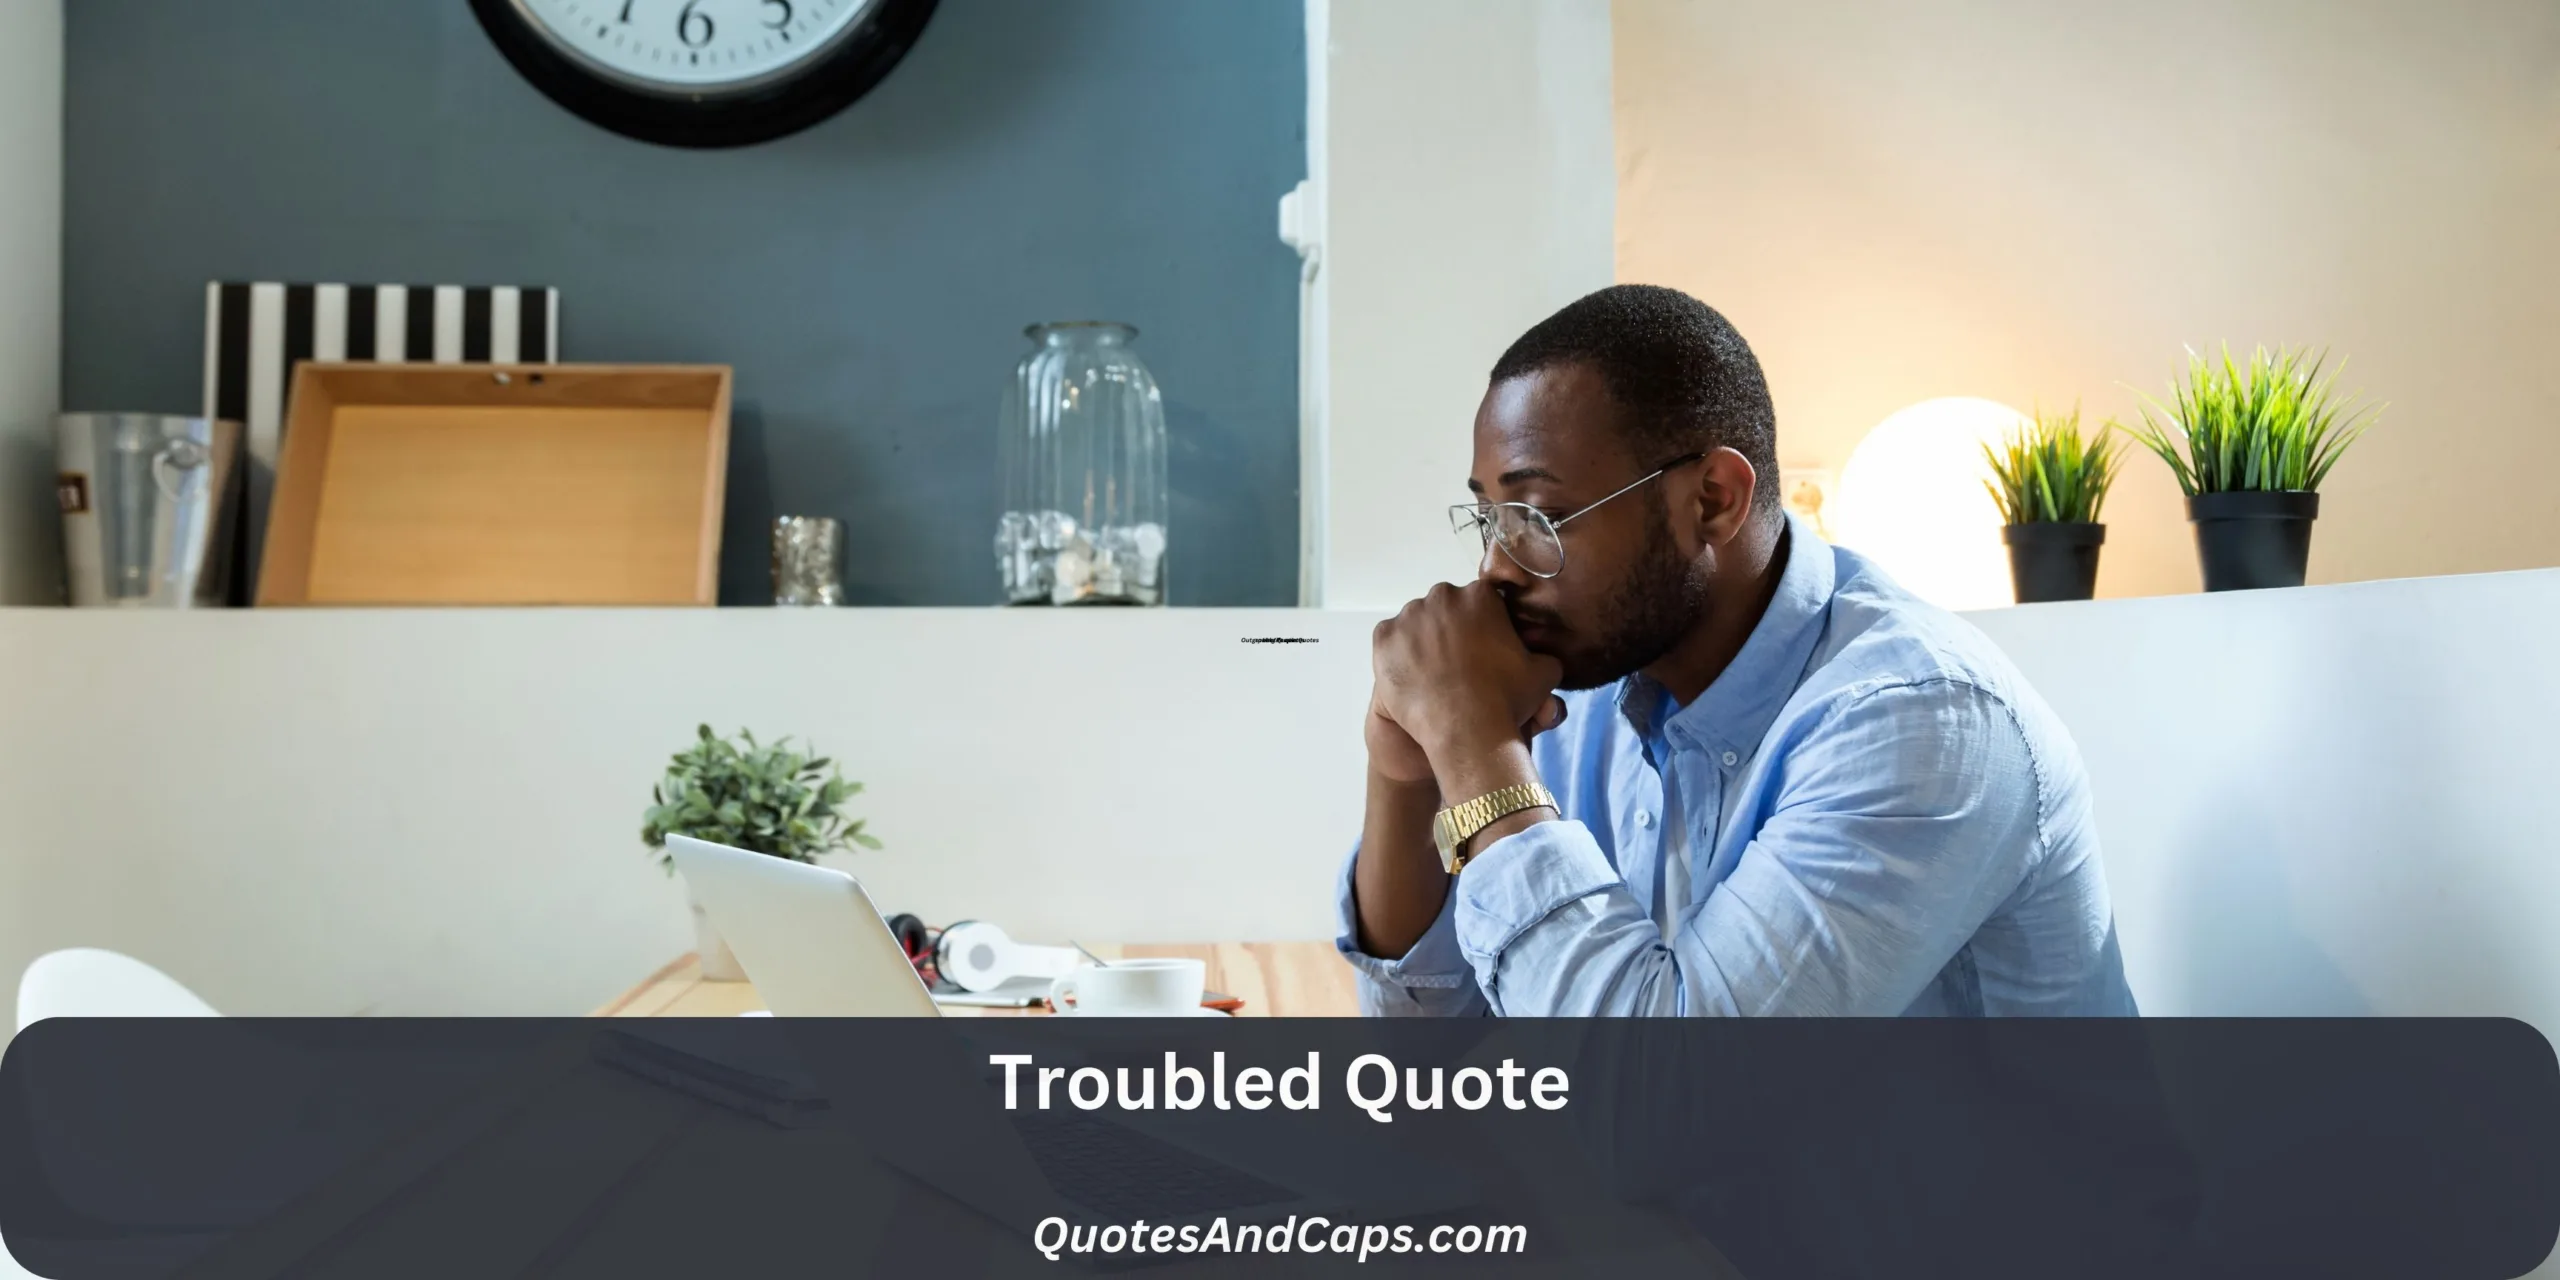 Troubled Quote